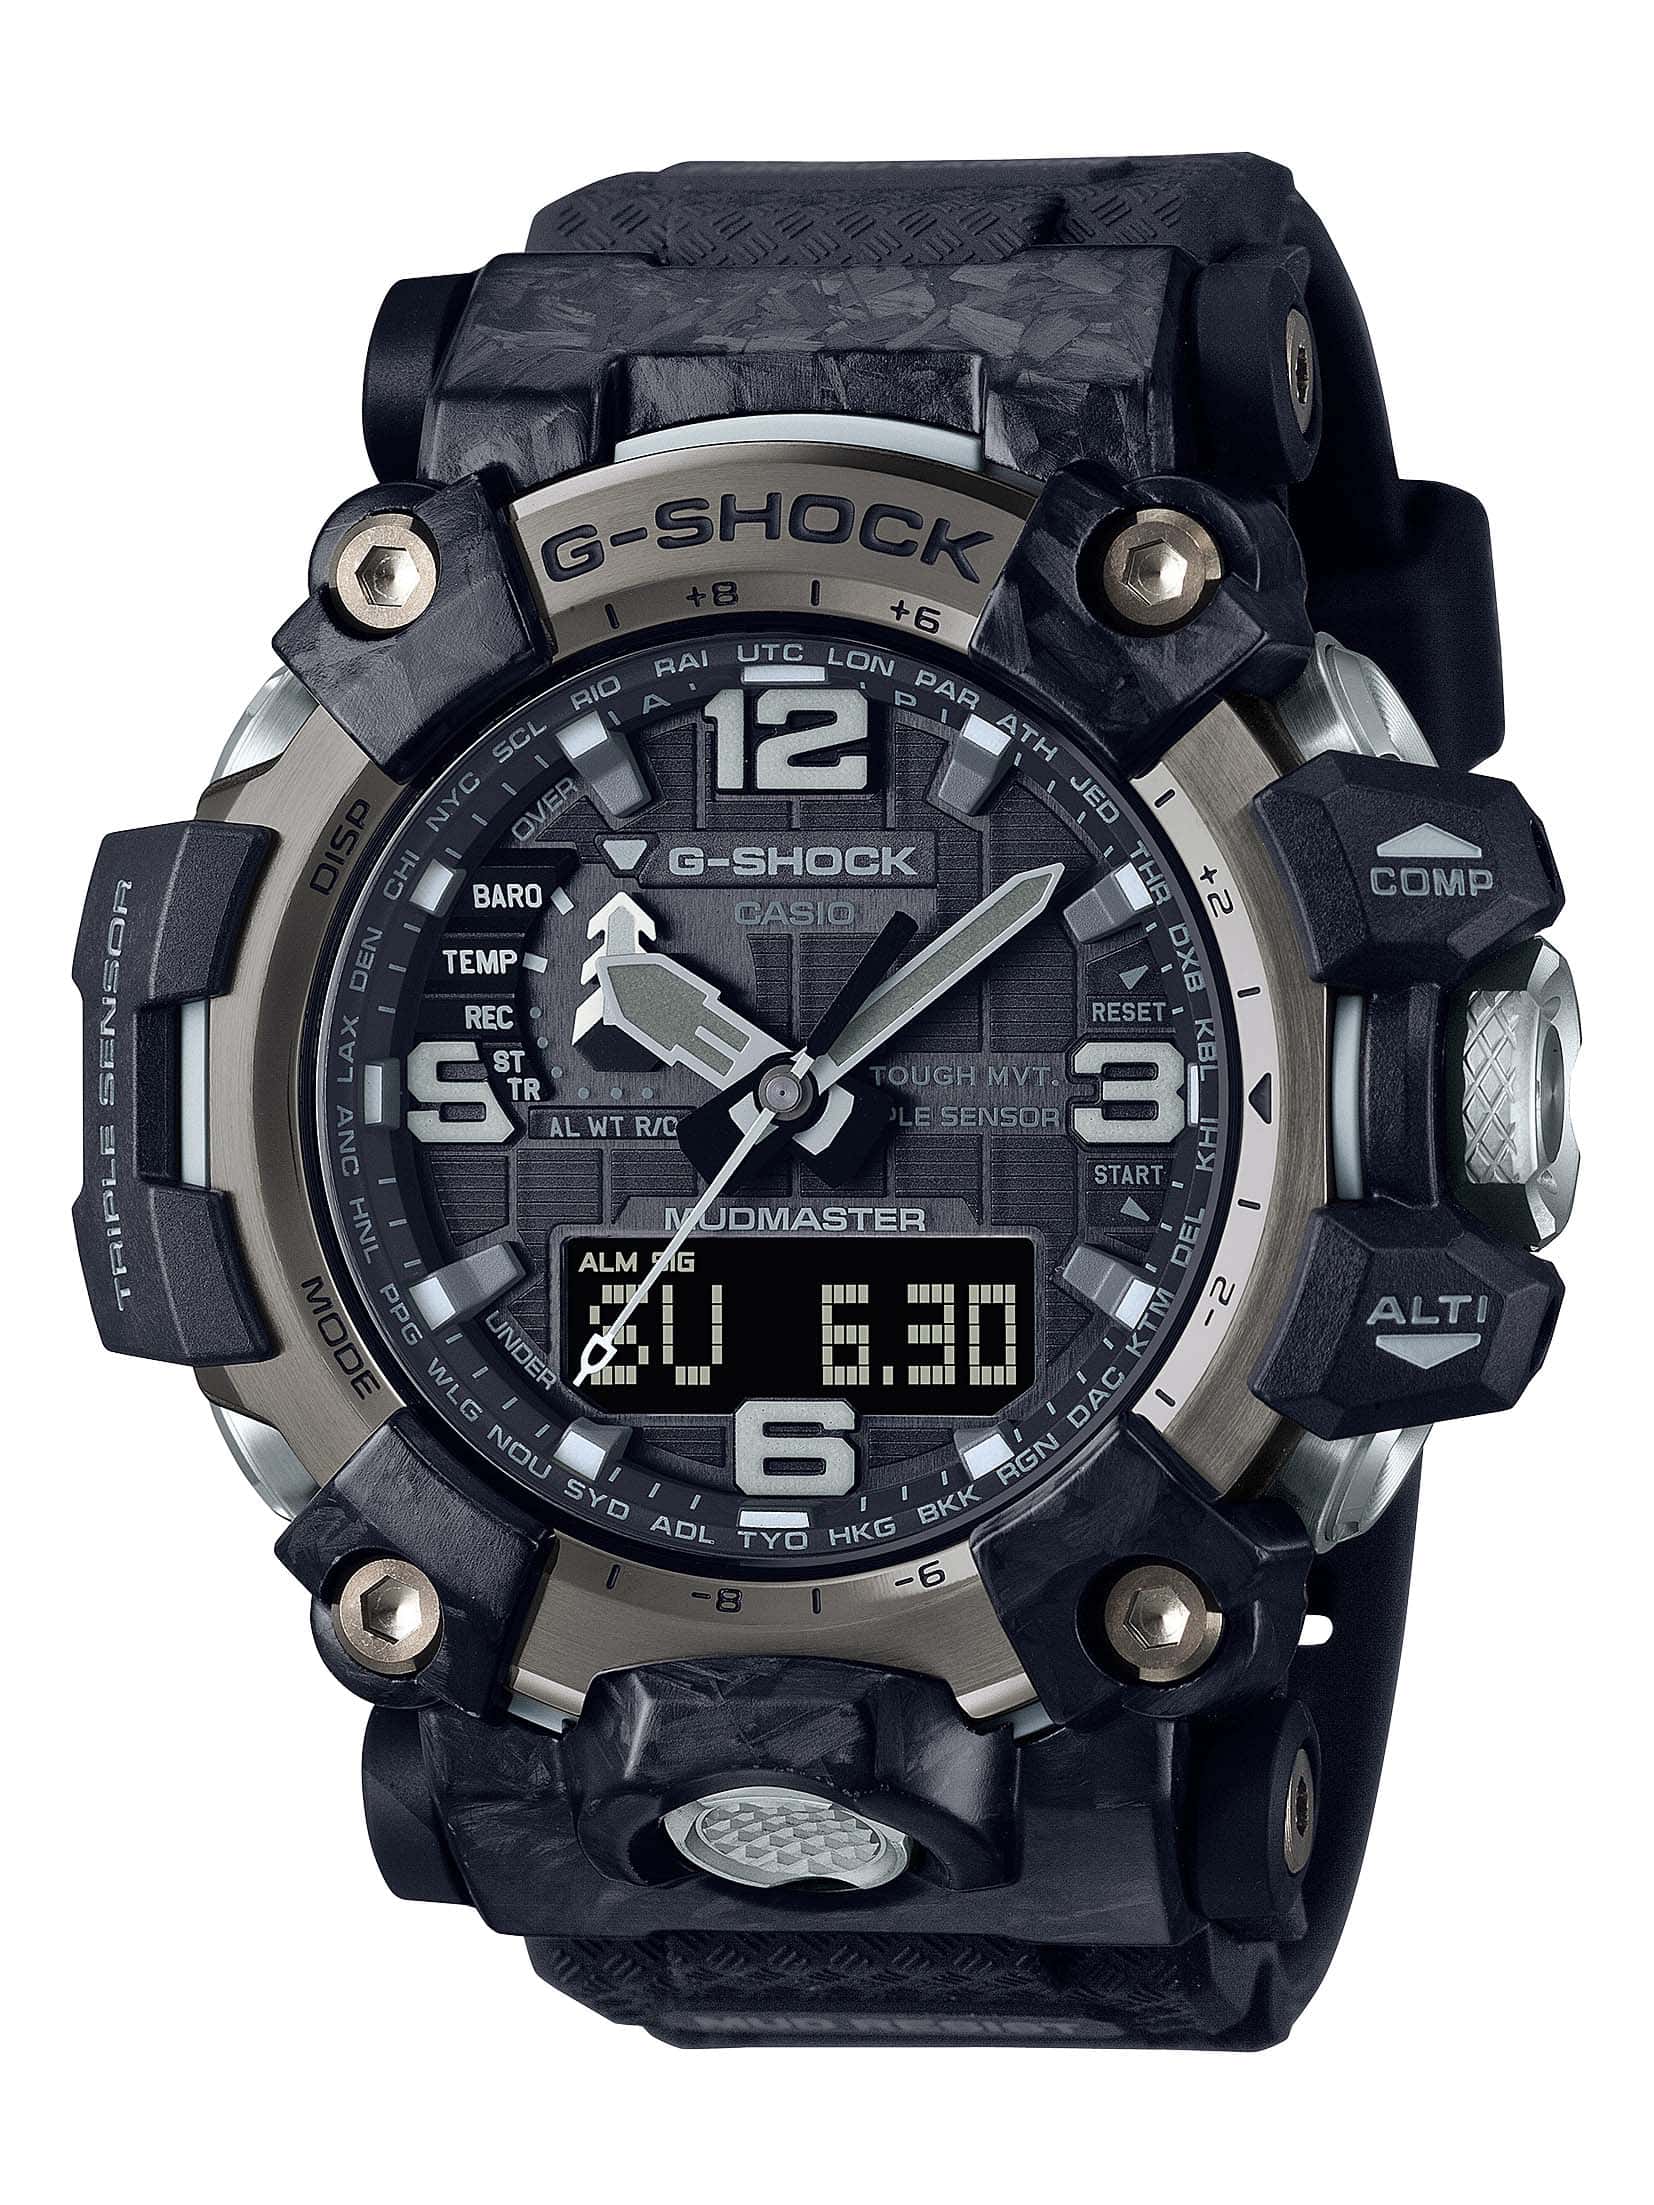 G-Shock Reveals New Mudmaster Lineup With Slimmer Case and Forged Carbon Case